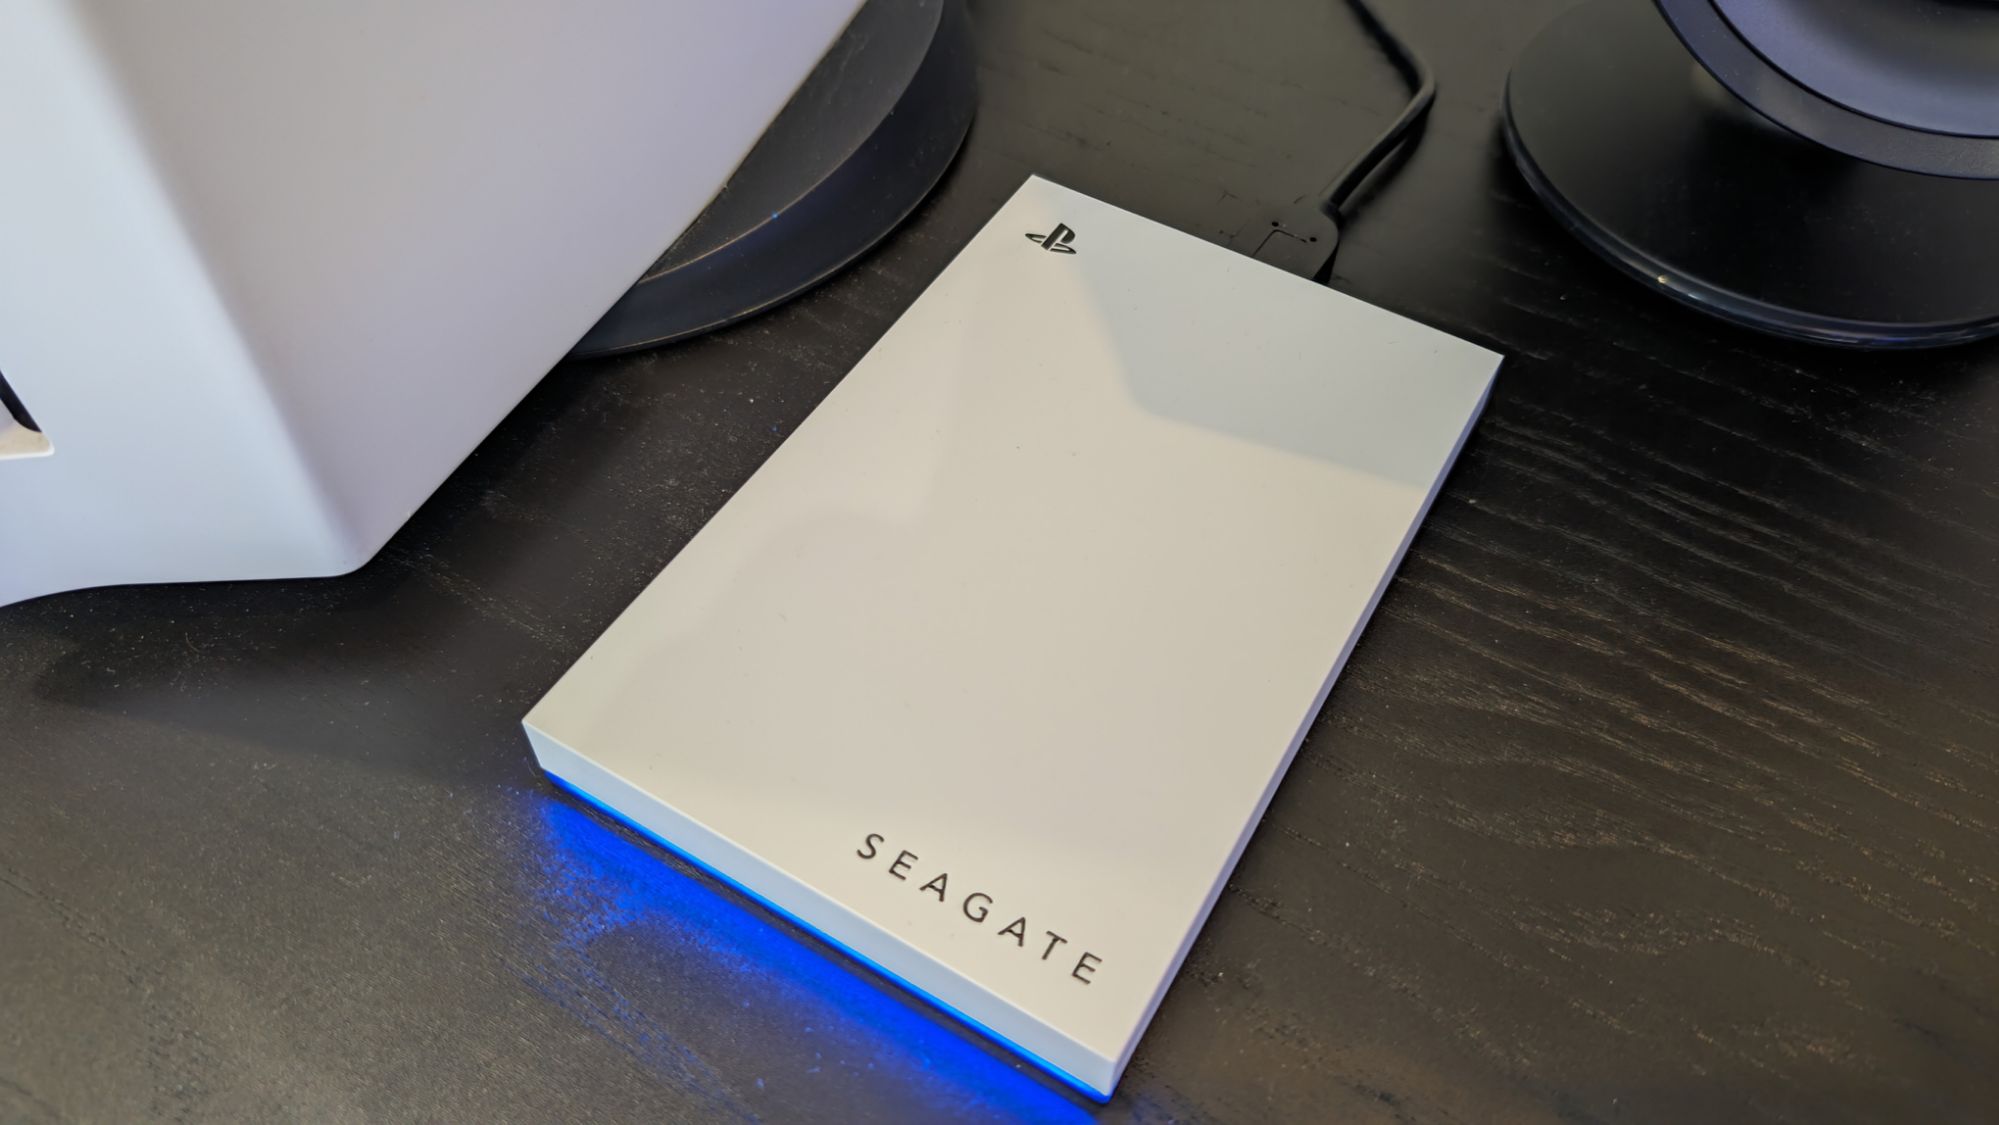 Seagate on Desk (Source: Game Crater)